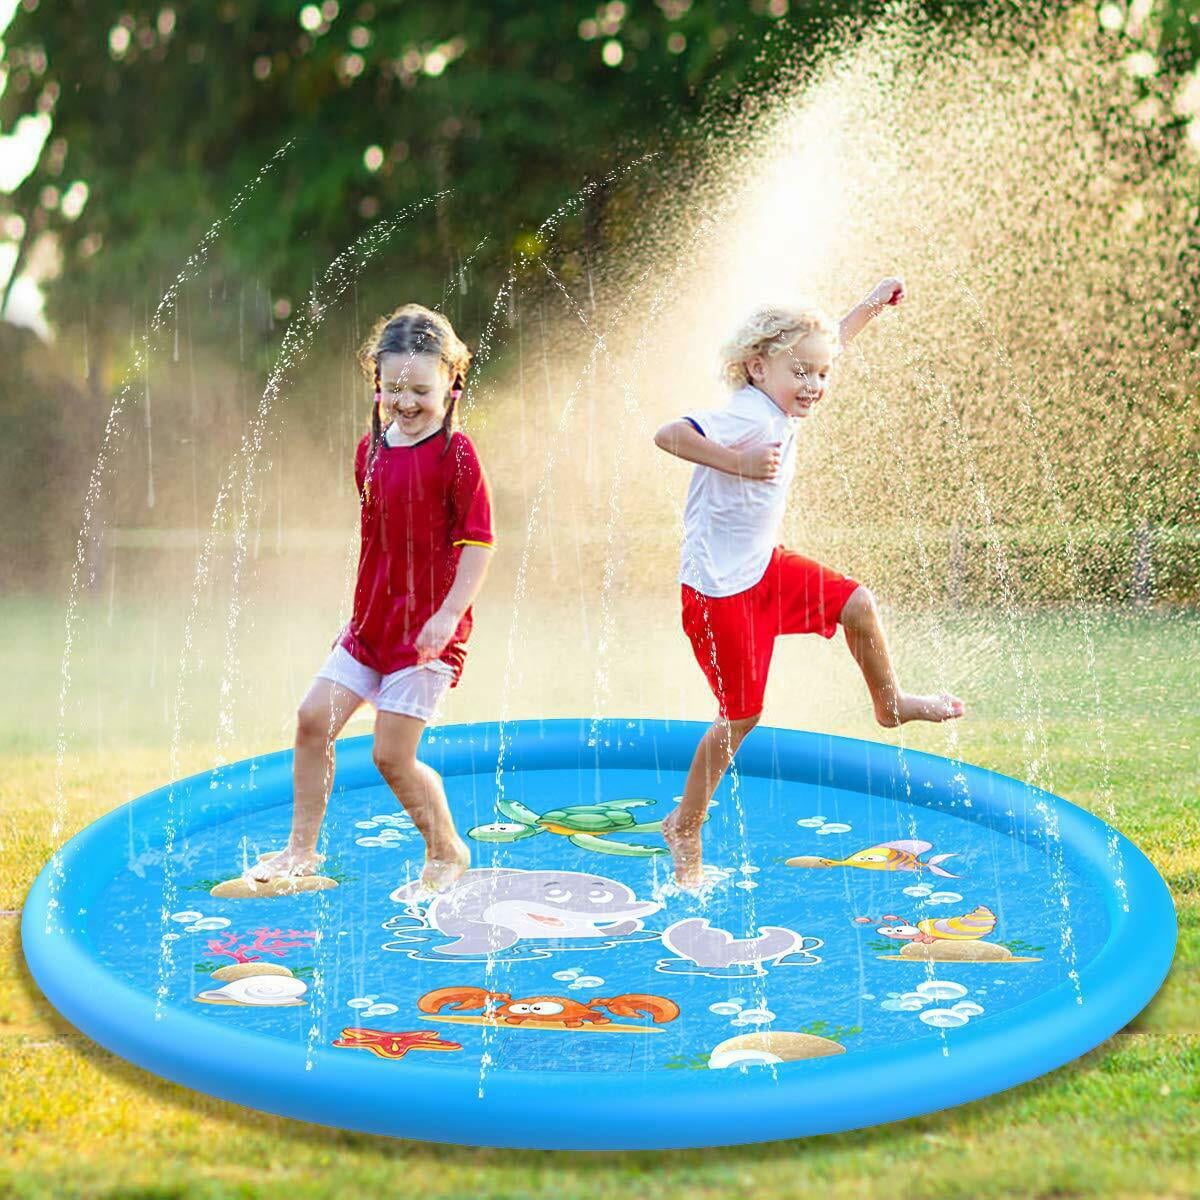 AJH 68 inch Children's Outdoor Play Mat/Large Kids Outdoor Water Toys Inflatable Water Spray Sprinkler Pad Summer Pool for Boys Girls Gift 